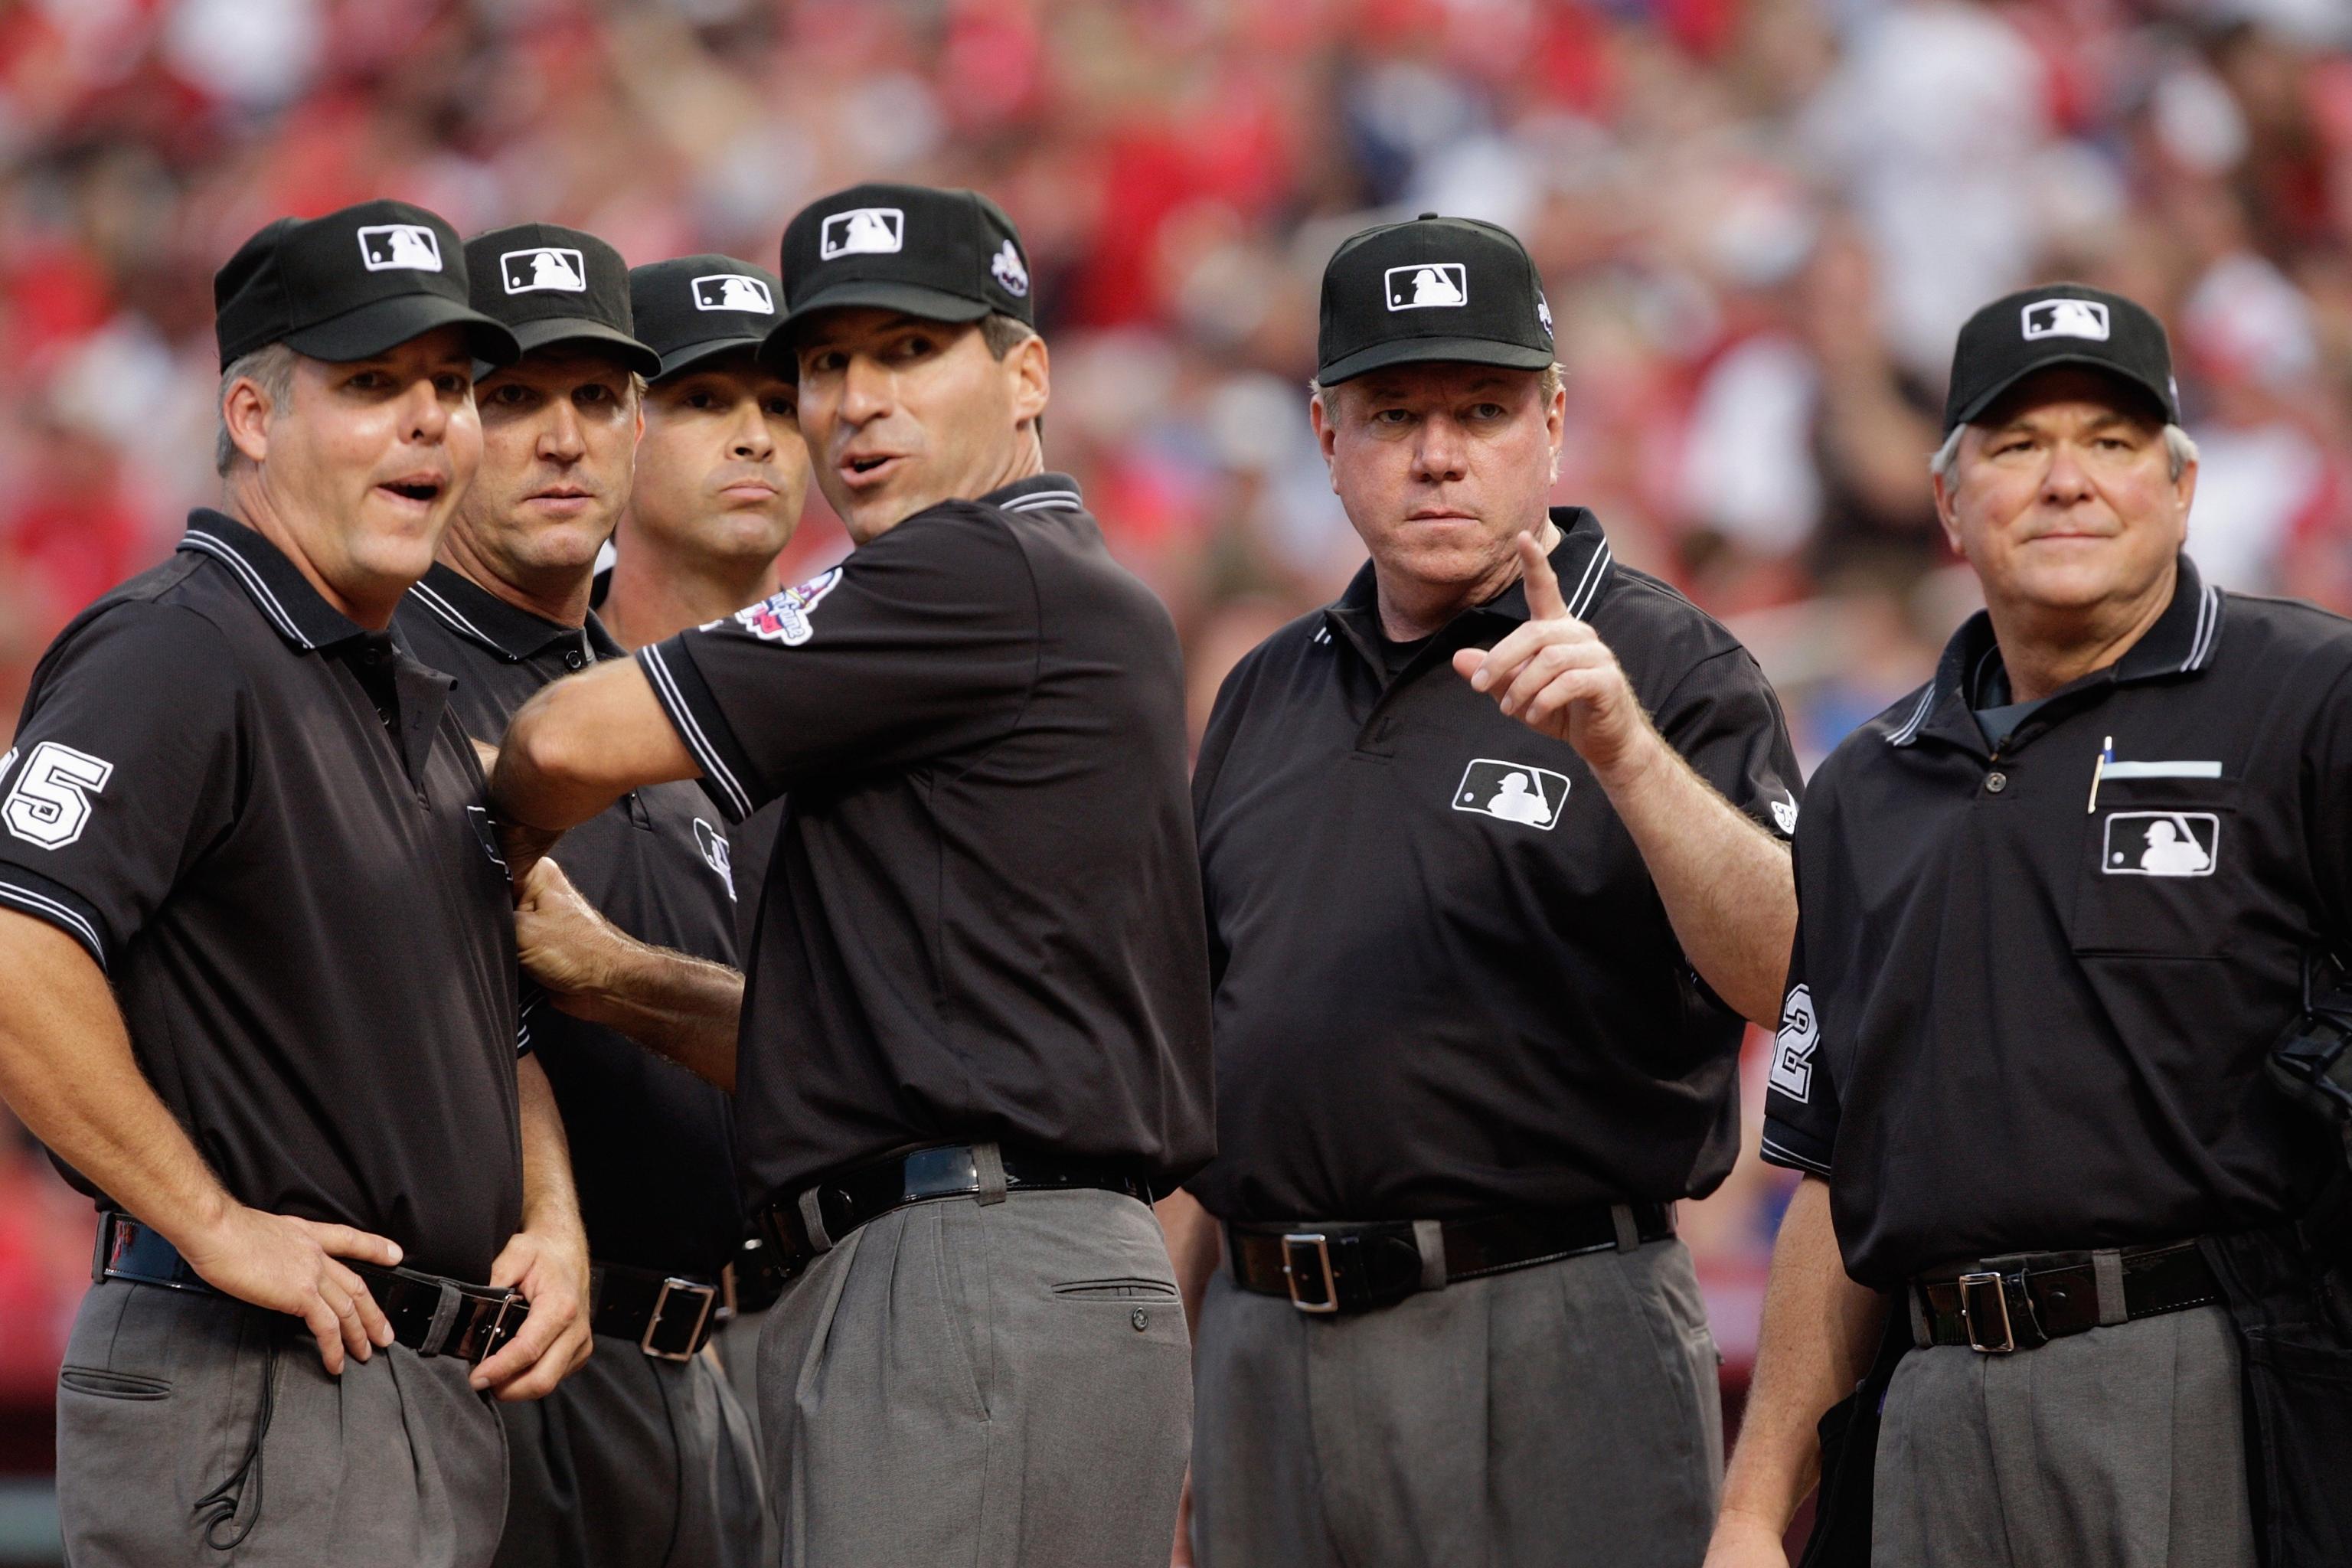 ADDS THE UMPIRES NAME - First base umpire reacts after Atlanta